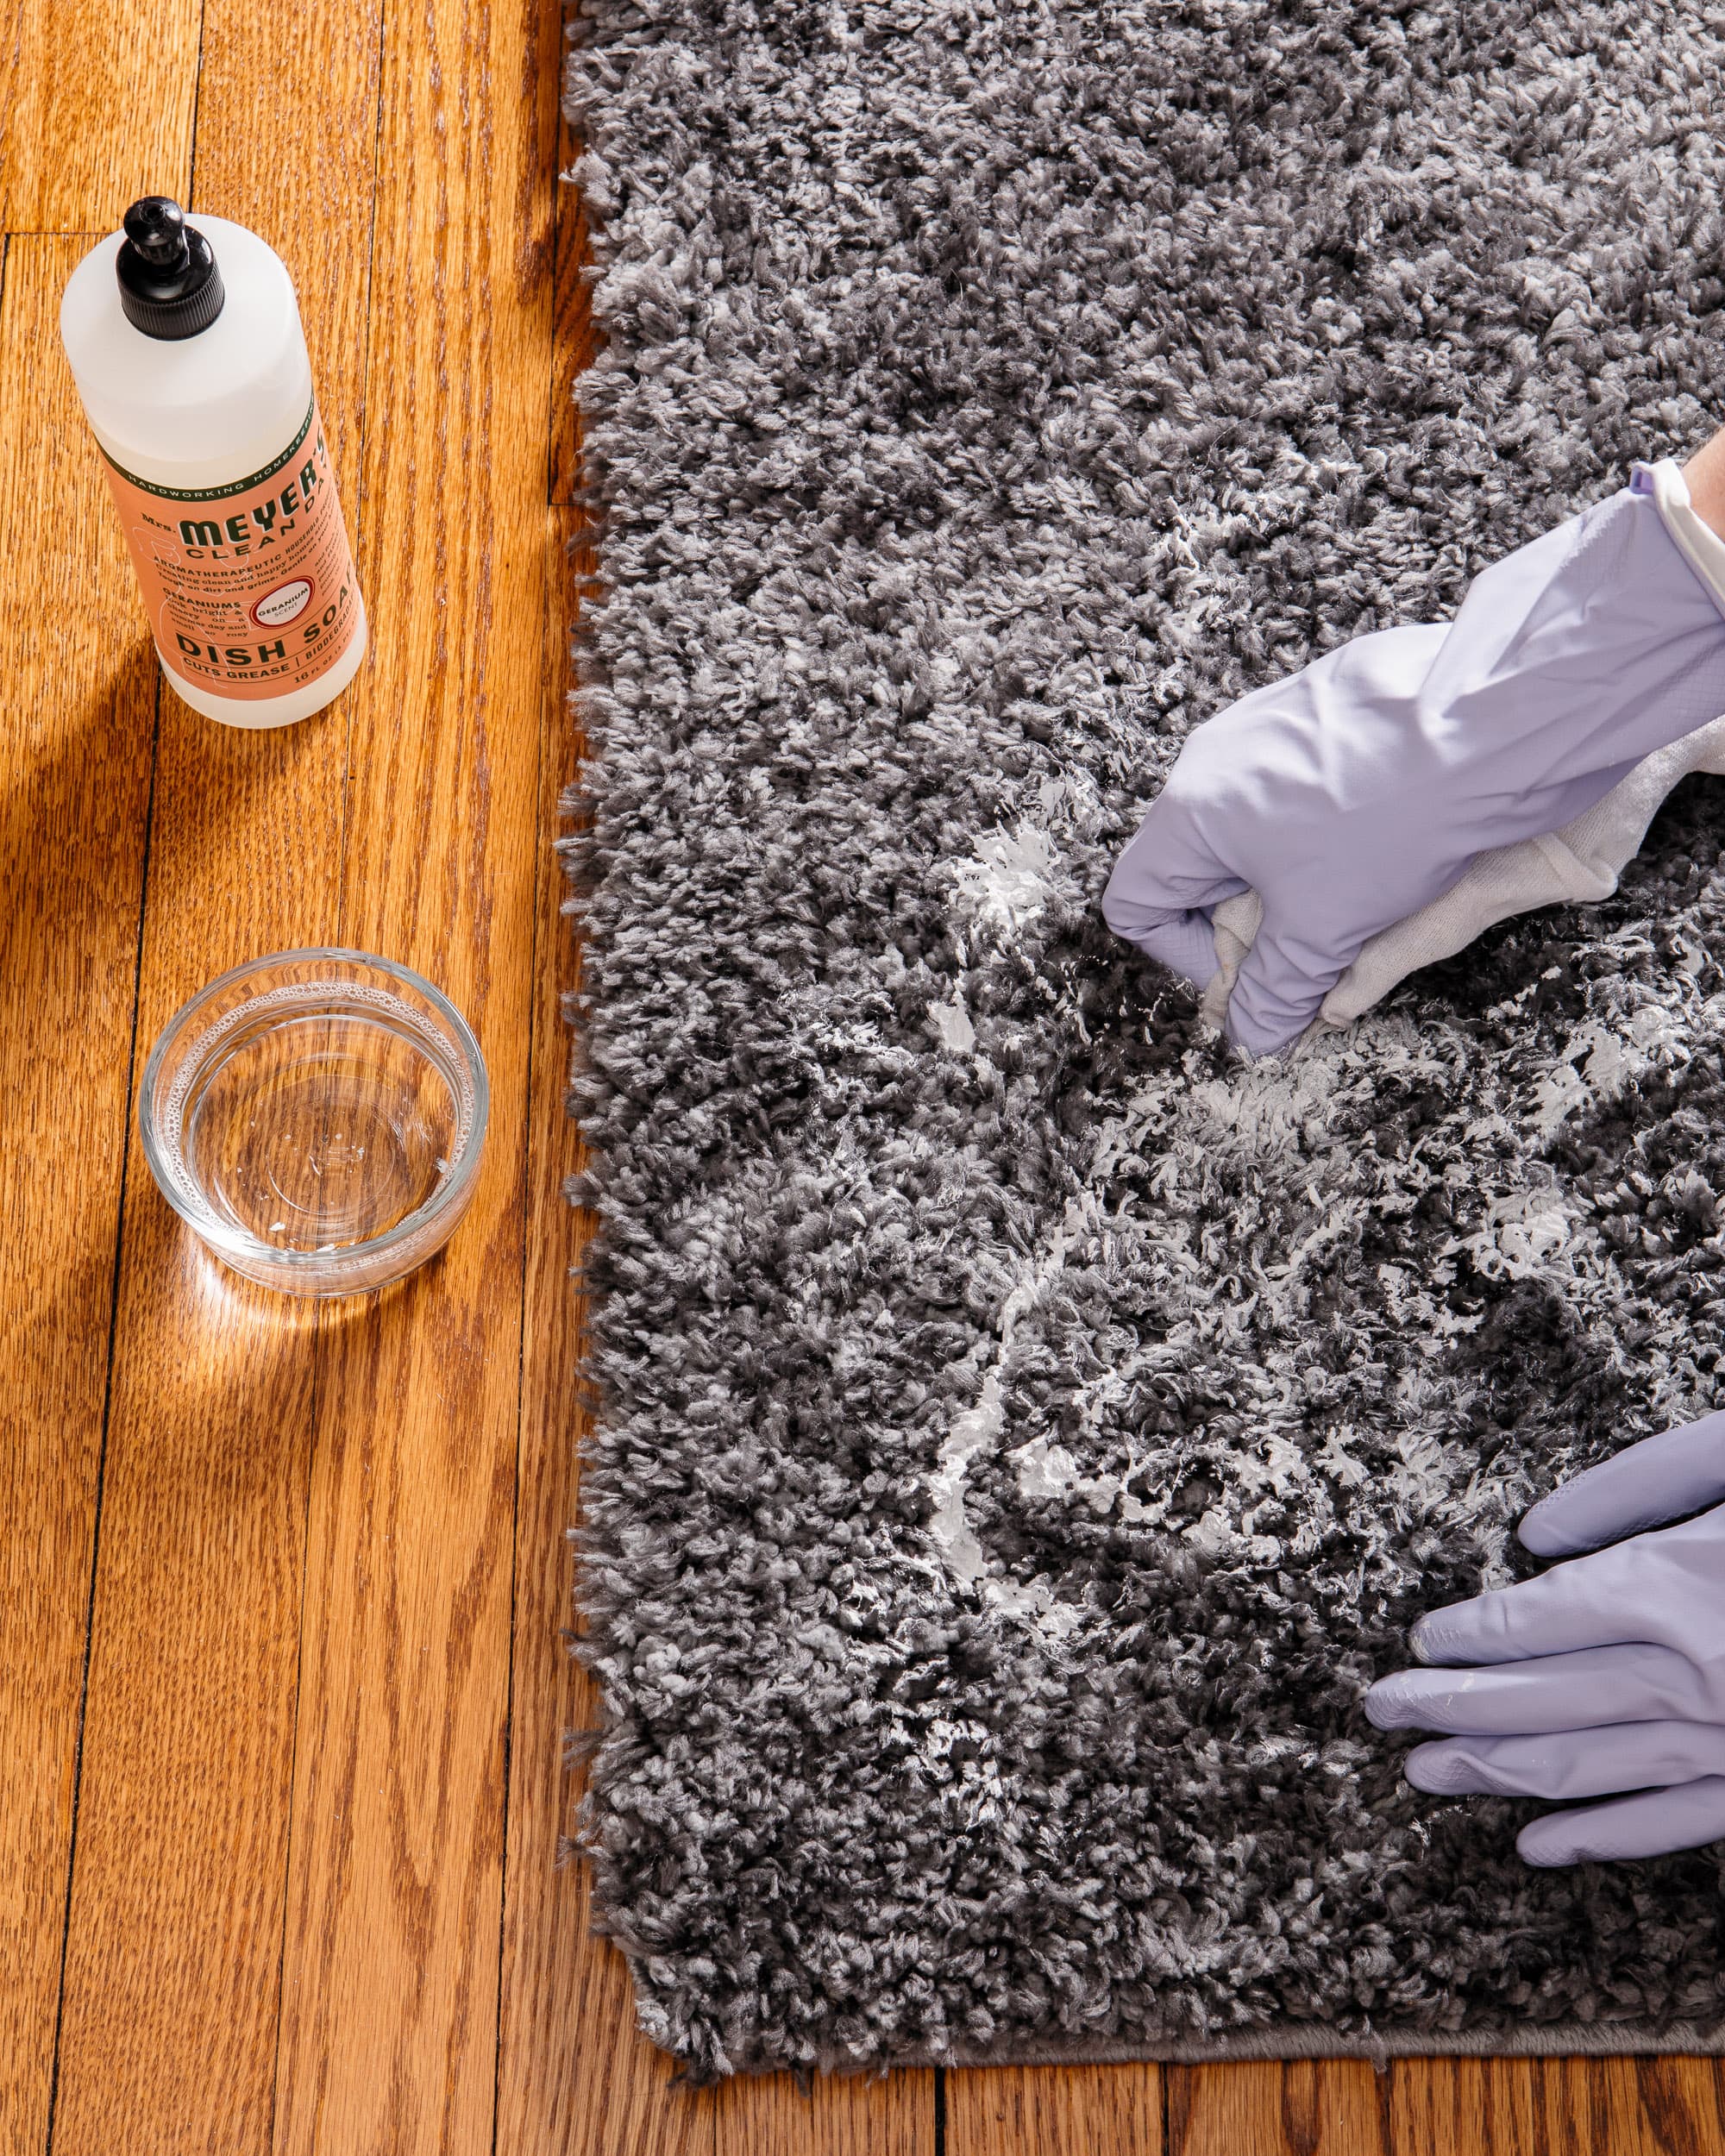 How to Get Paint Out of Carpet - 2 Ways to Remove Paint Stains